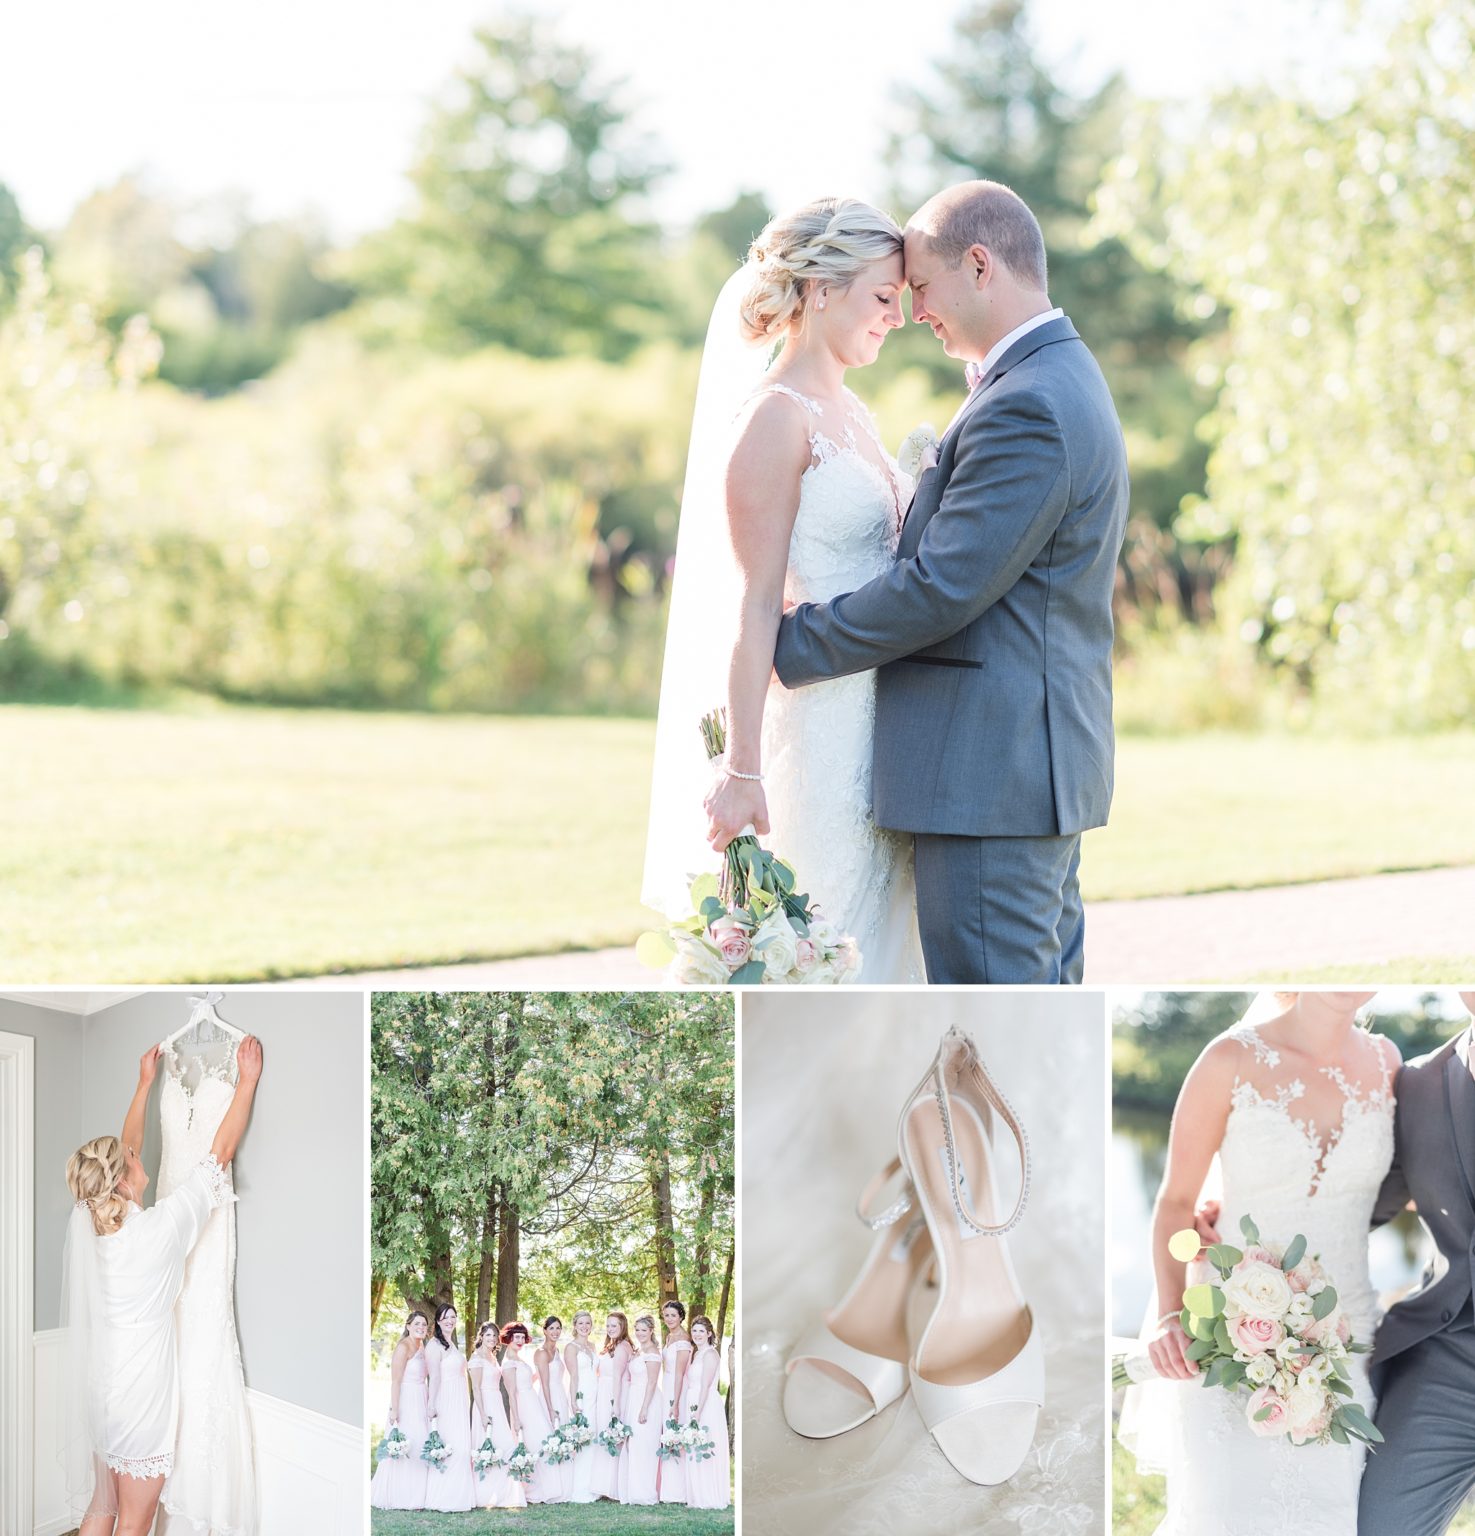 legant Blush & Gold Timeless Wedding at Orchardview Wedding and Conference Centre | Ottawa Wedding Get more inspiration from this fun summertime wedding. #ottawawedding #weddingphotography #ottawaweddings